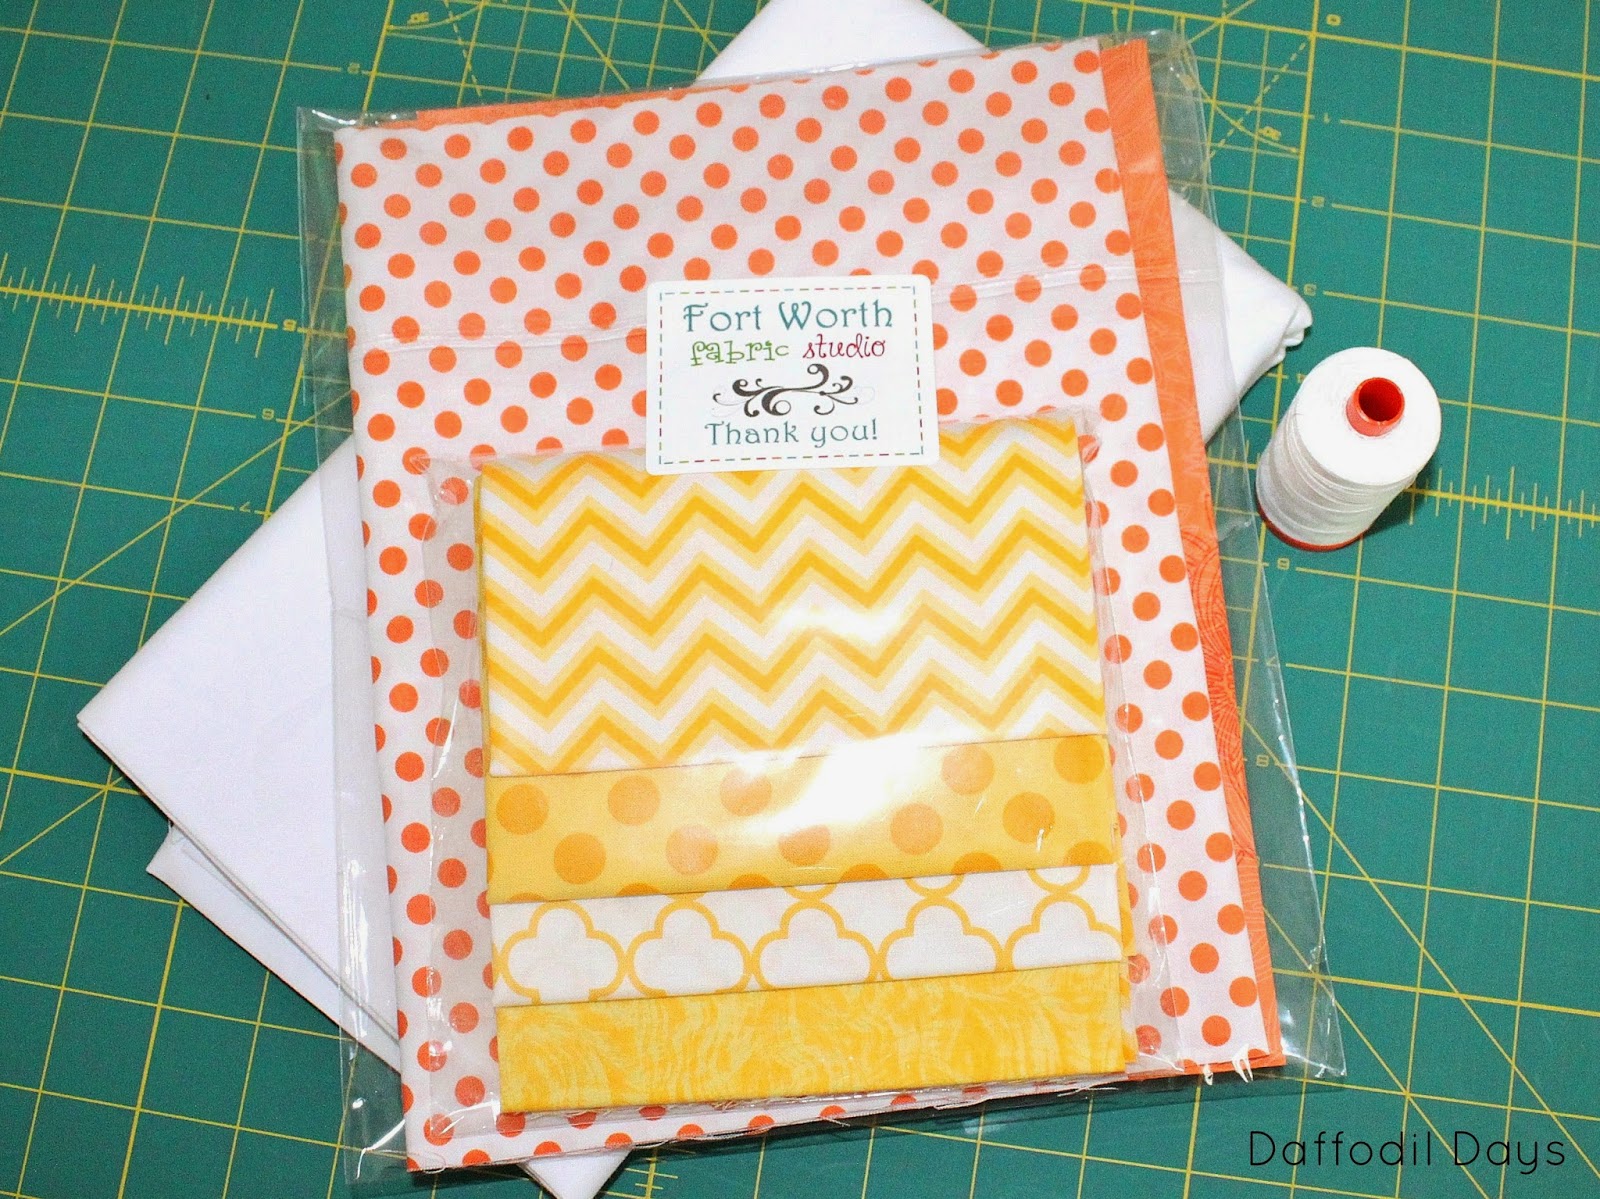 Daffodil Days {Throw Pillow Tutorial} designed by Sarah Nunes for Fort Worth Fabric Studio